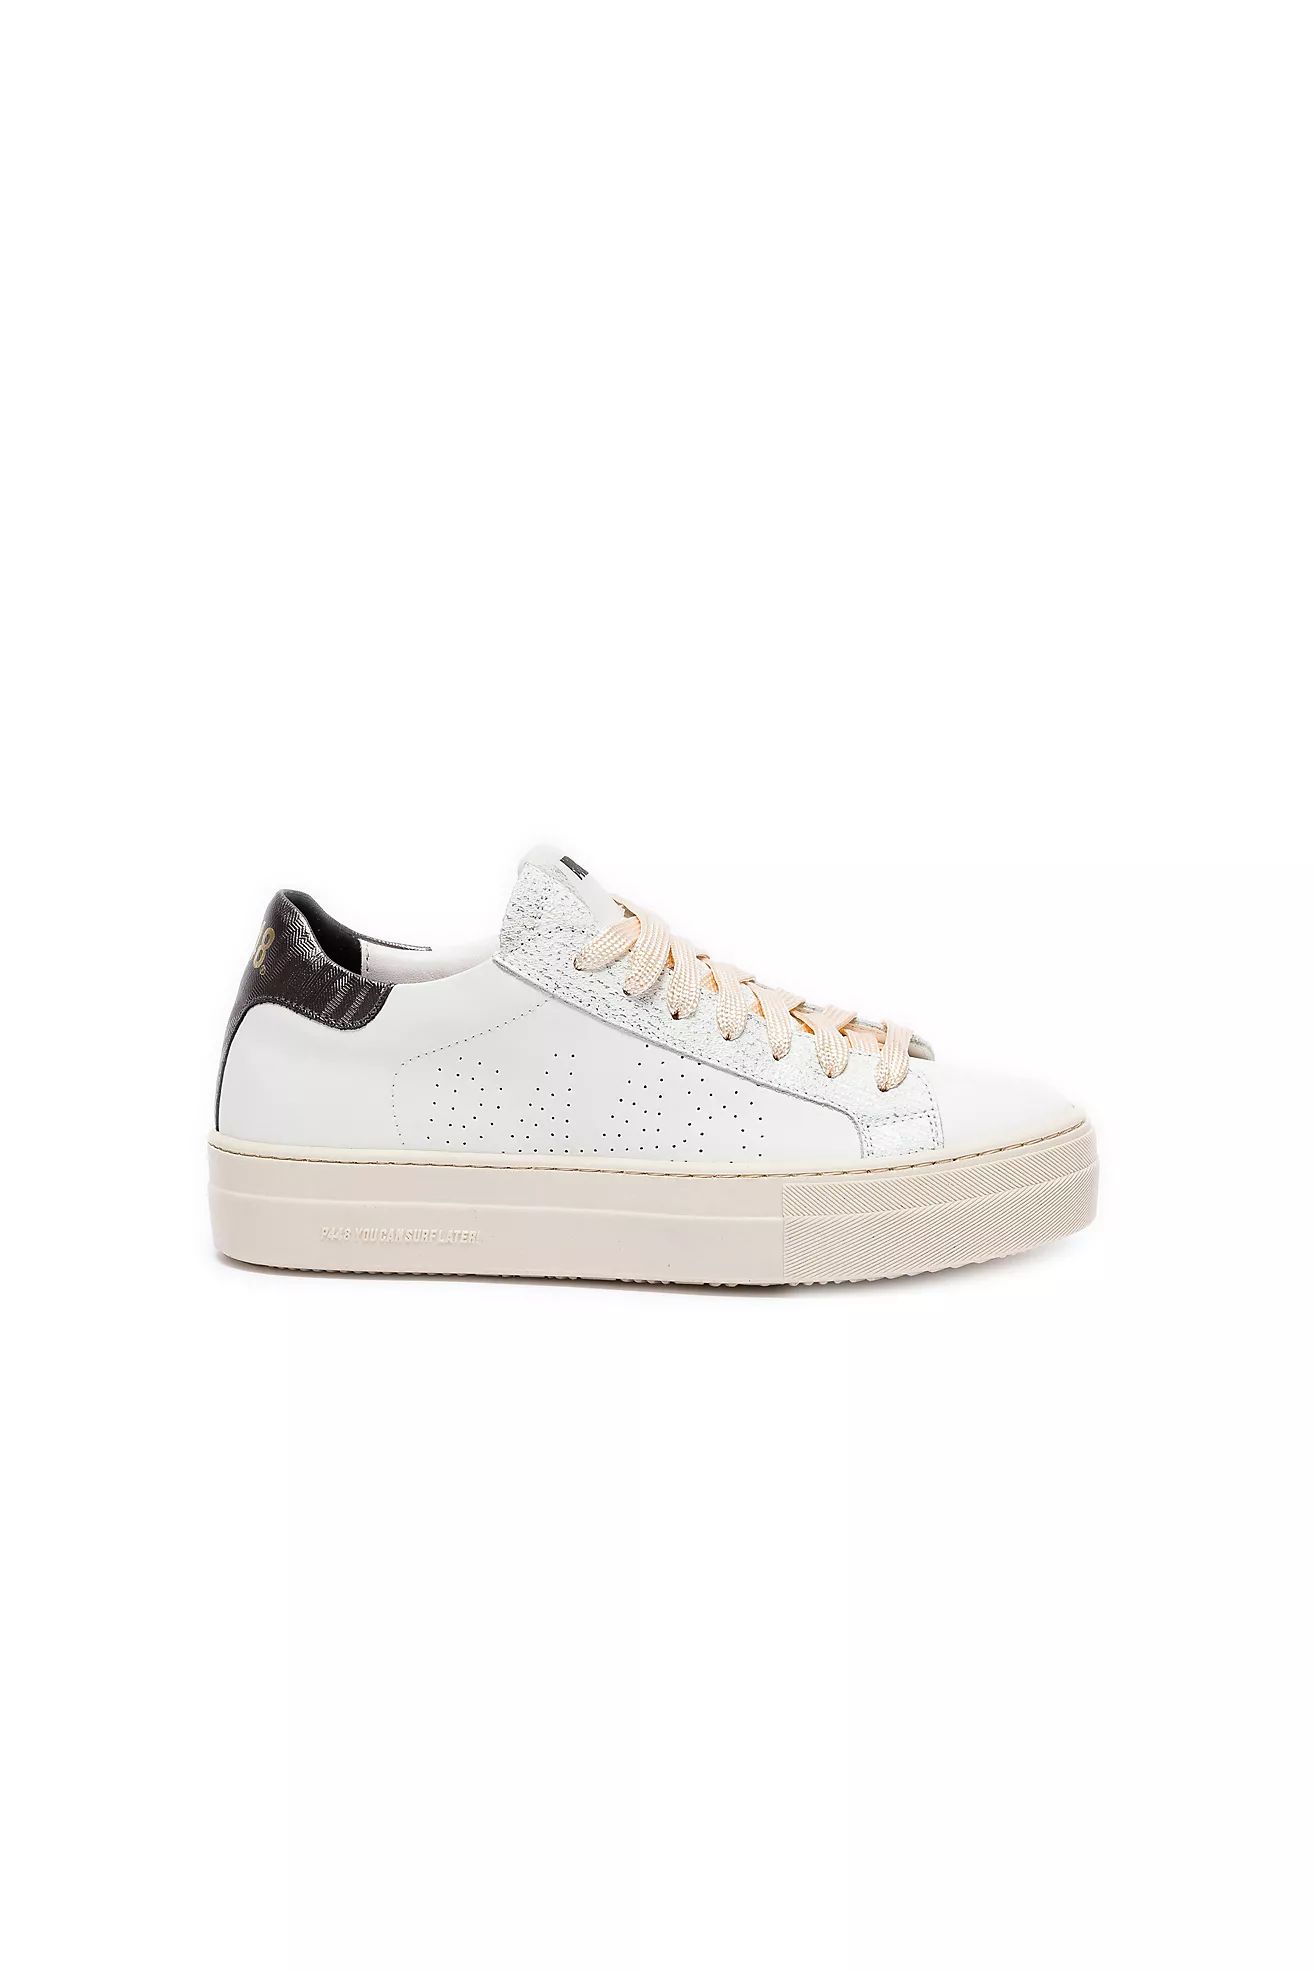 P448 Thea Sneakers | Anthropologie (US)